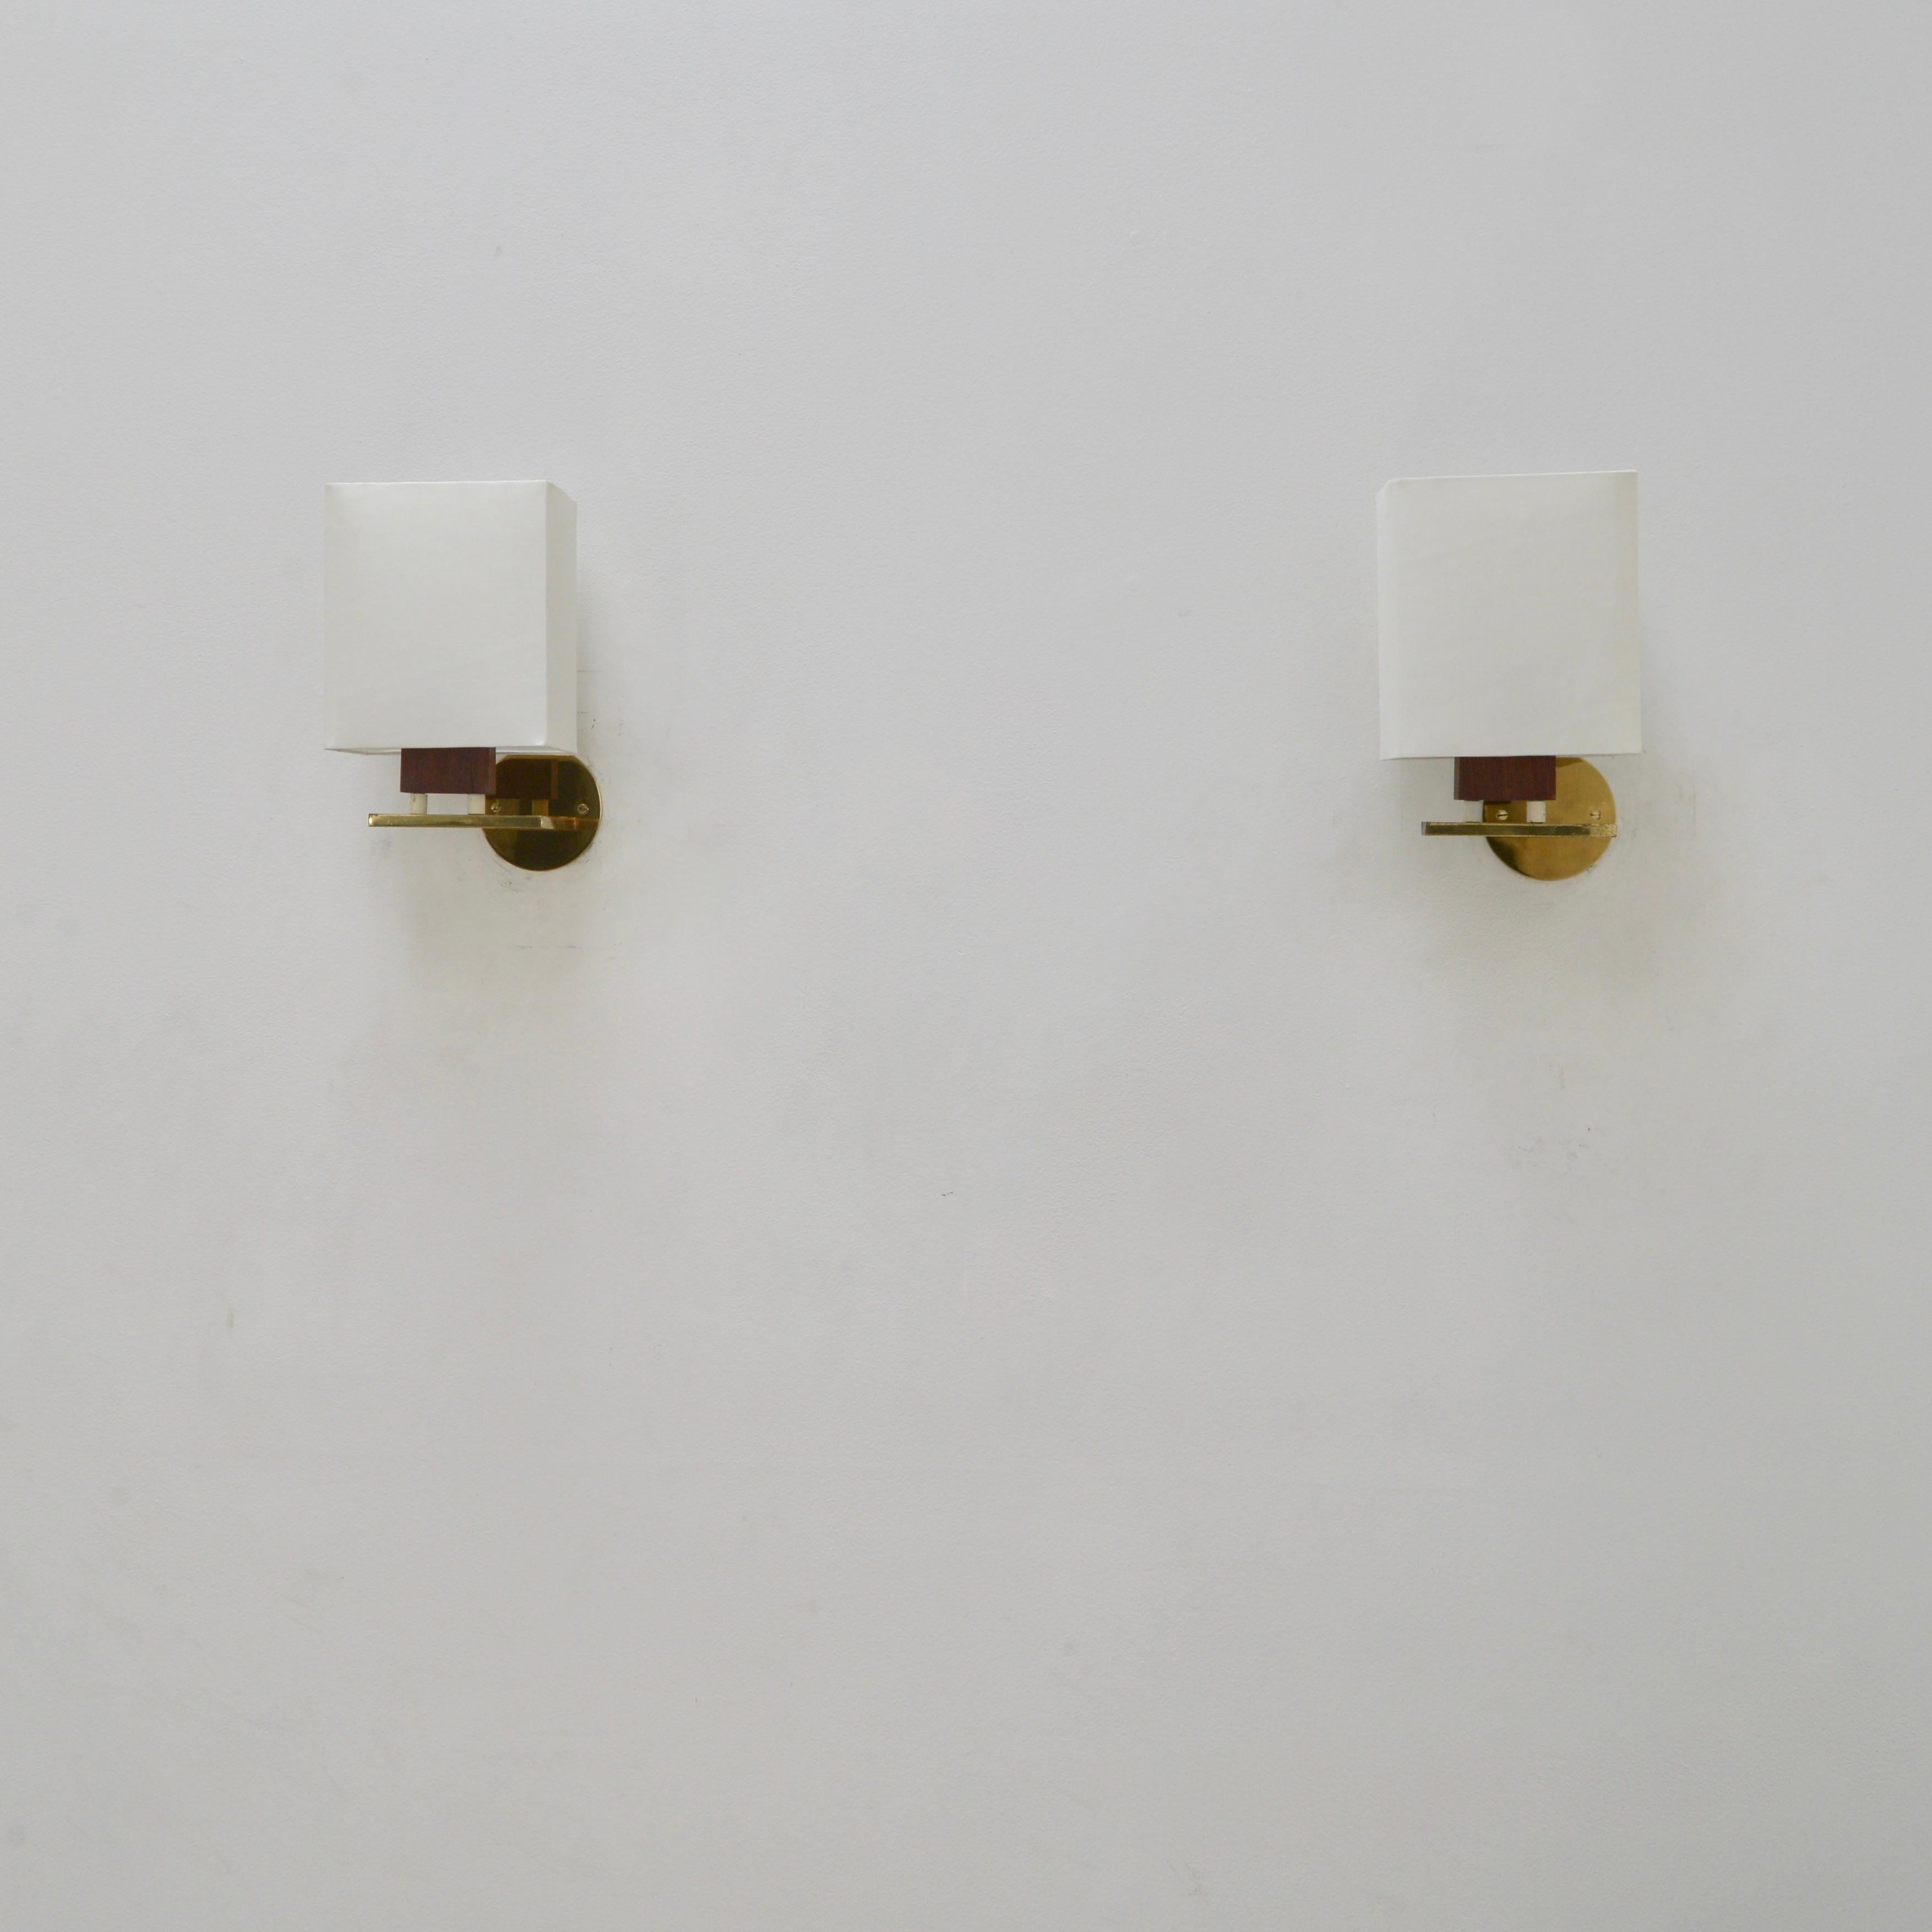 Beautiful Classic Mid-Century Modern teak & fabric Italian sconces from the 50s. (2) E12 candelabra based sockets per sconce. Priced as a pair. Wired for use in the US. Lightbulbs included with order.
Measurements:
Height: 12” 
Depth: 5”
Width: